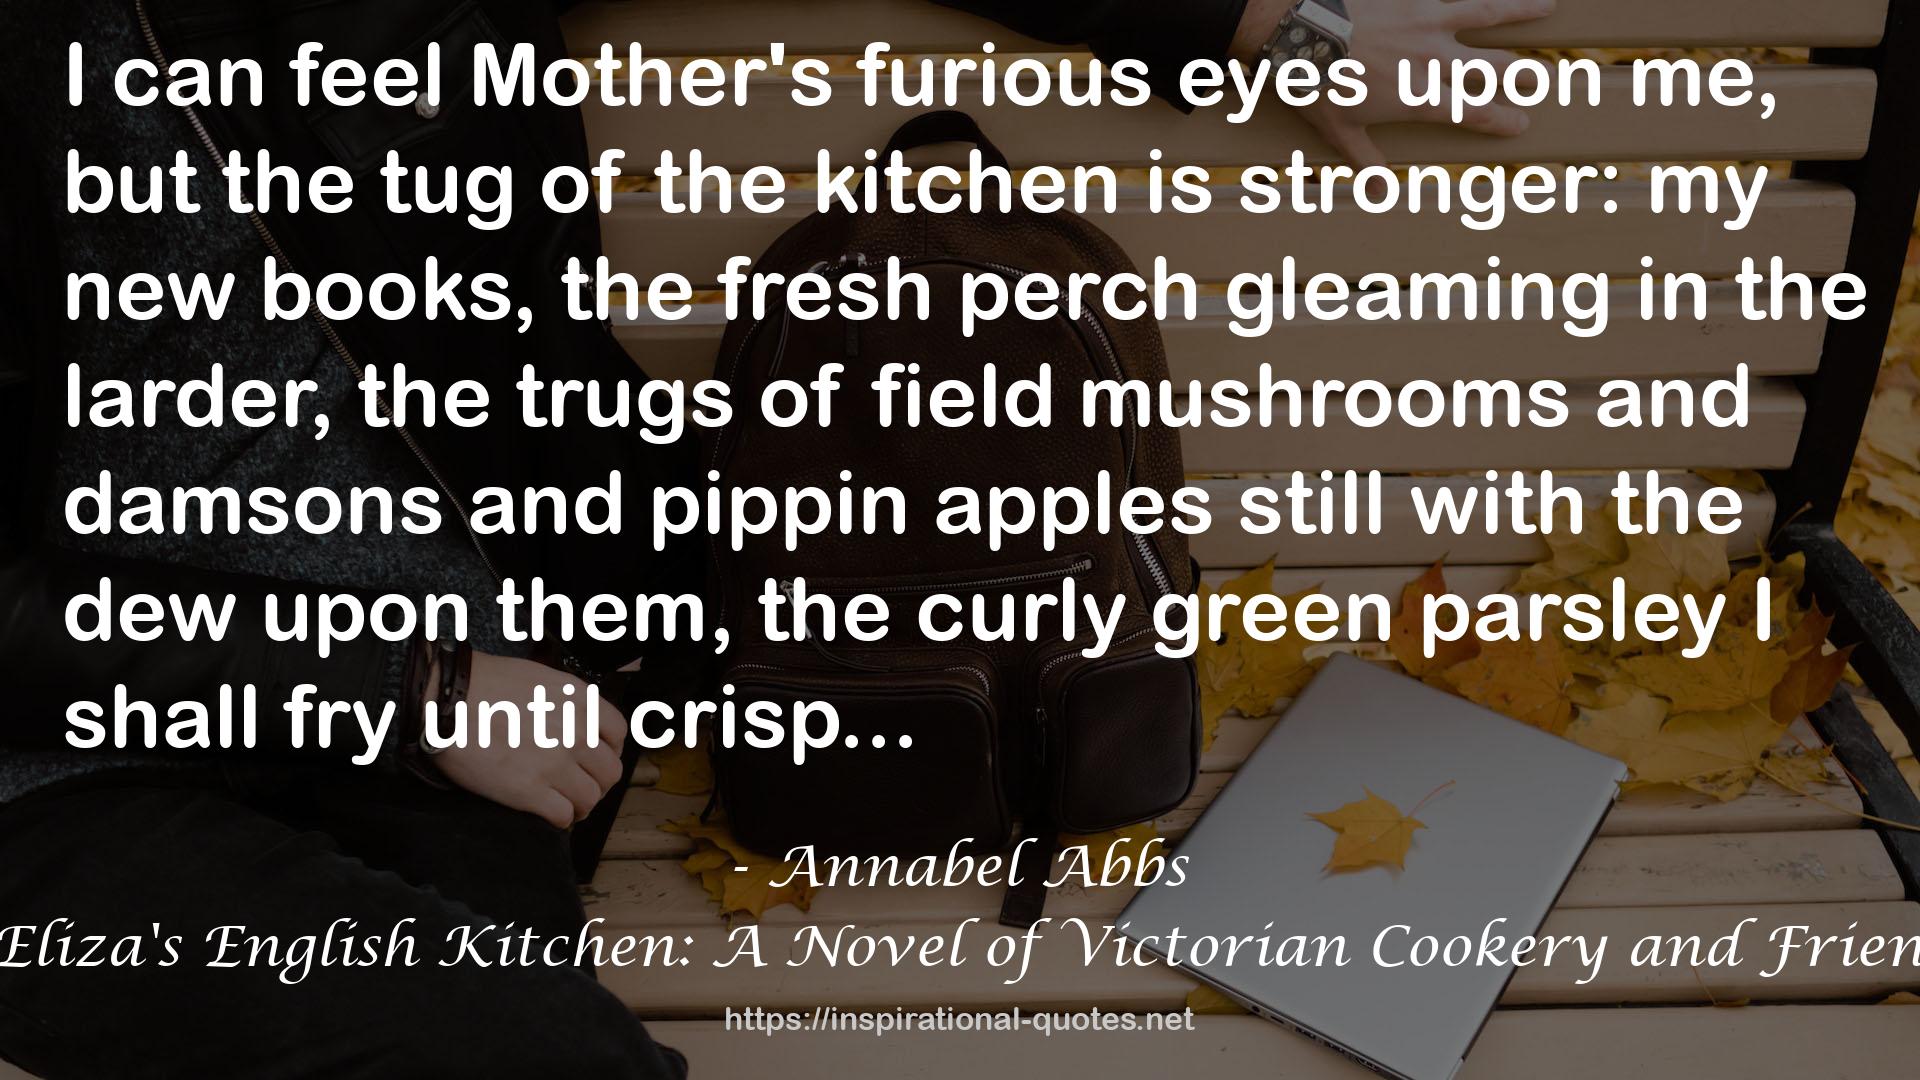 Miss Eliza's English Kitchen: A Novel of Victorian Cookery and Friendship QUOTES